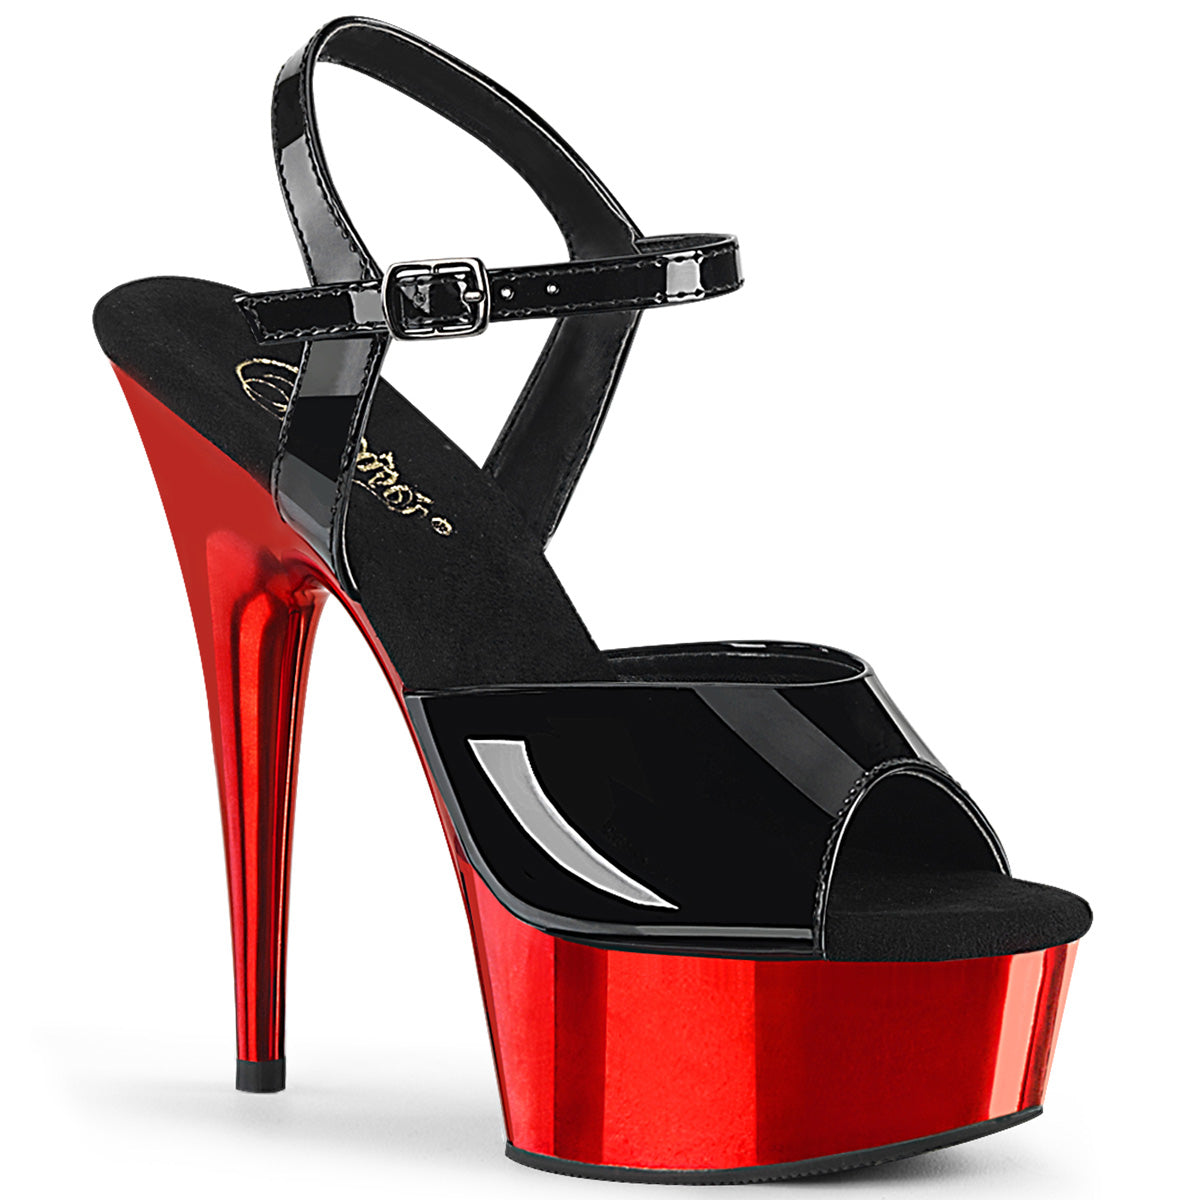 DELIGHT-609 6" Black with Red Chrome Pole Dancer Platforms-Pleaser- Sexy Shoes